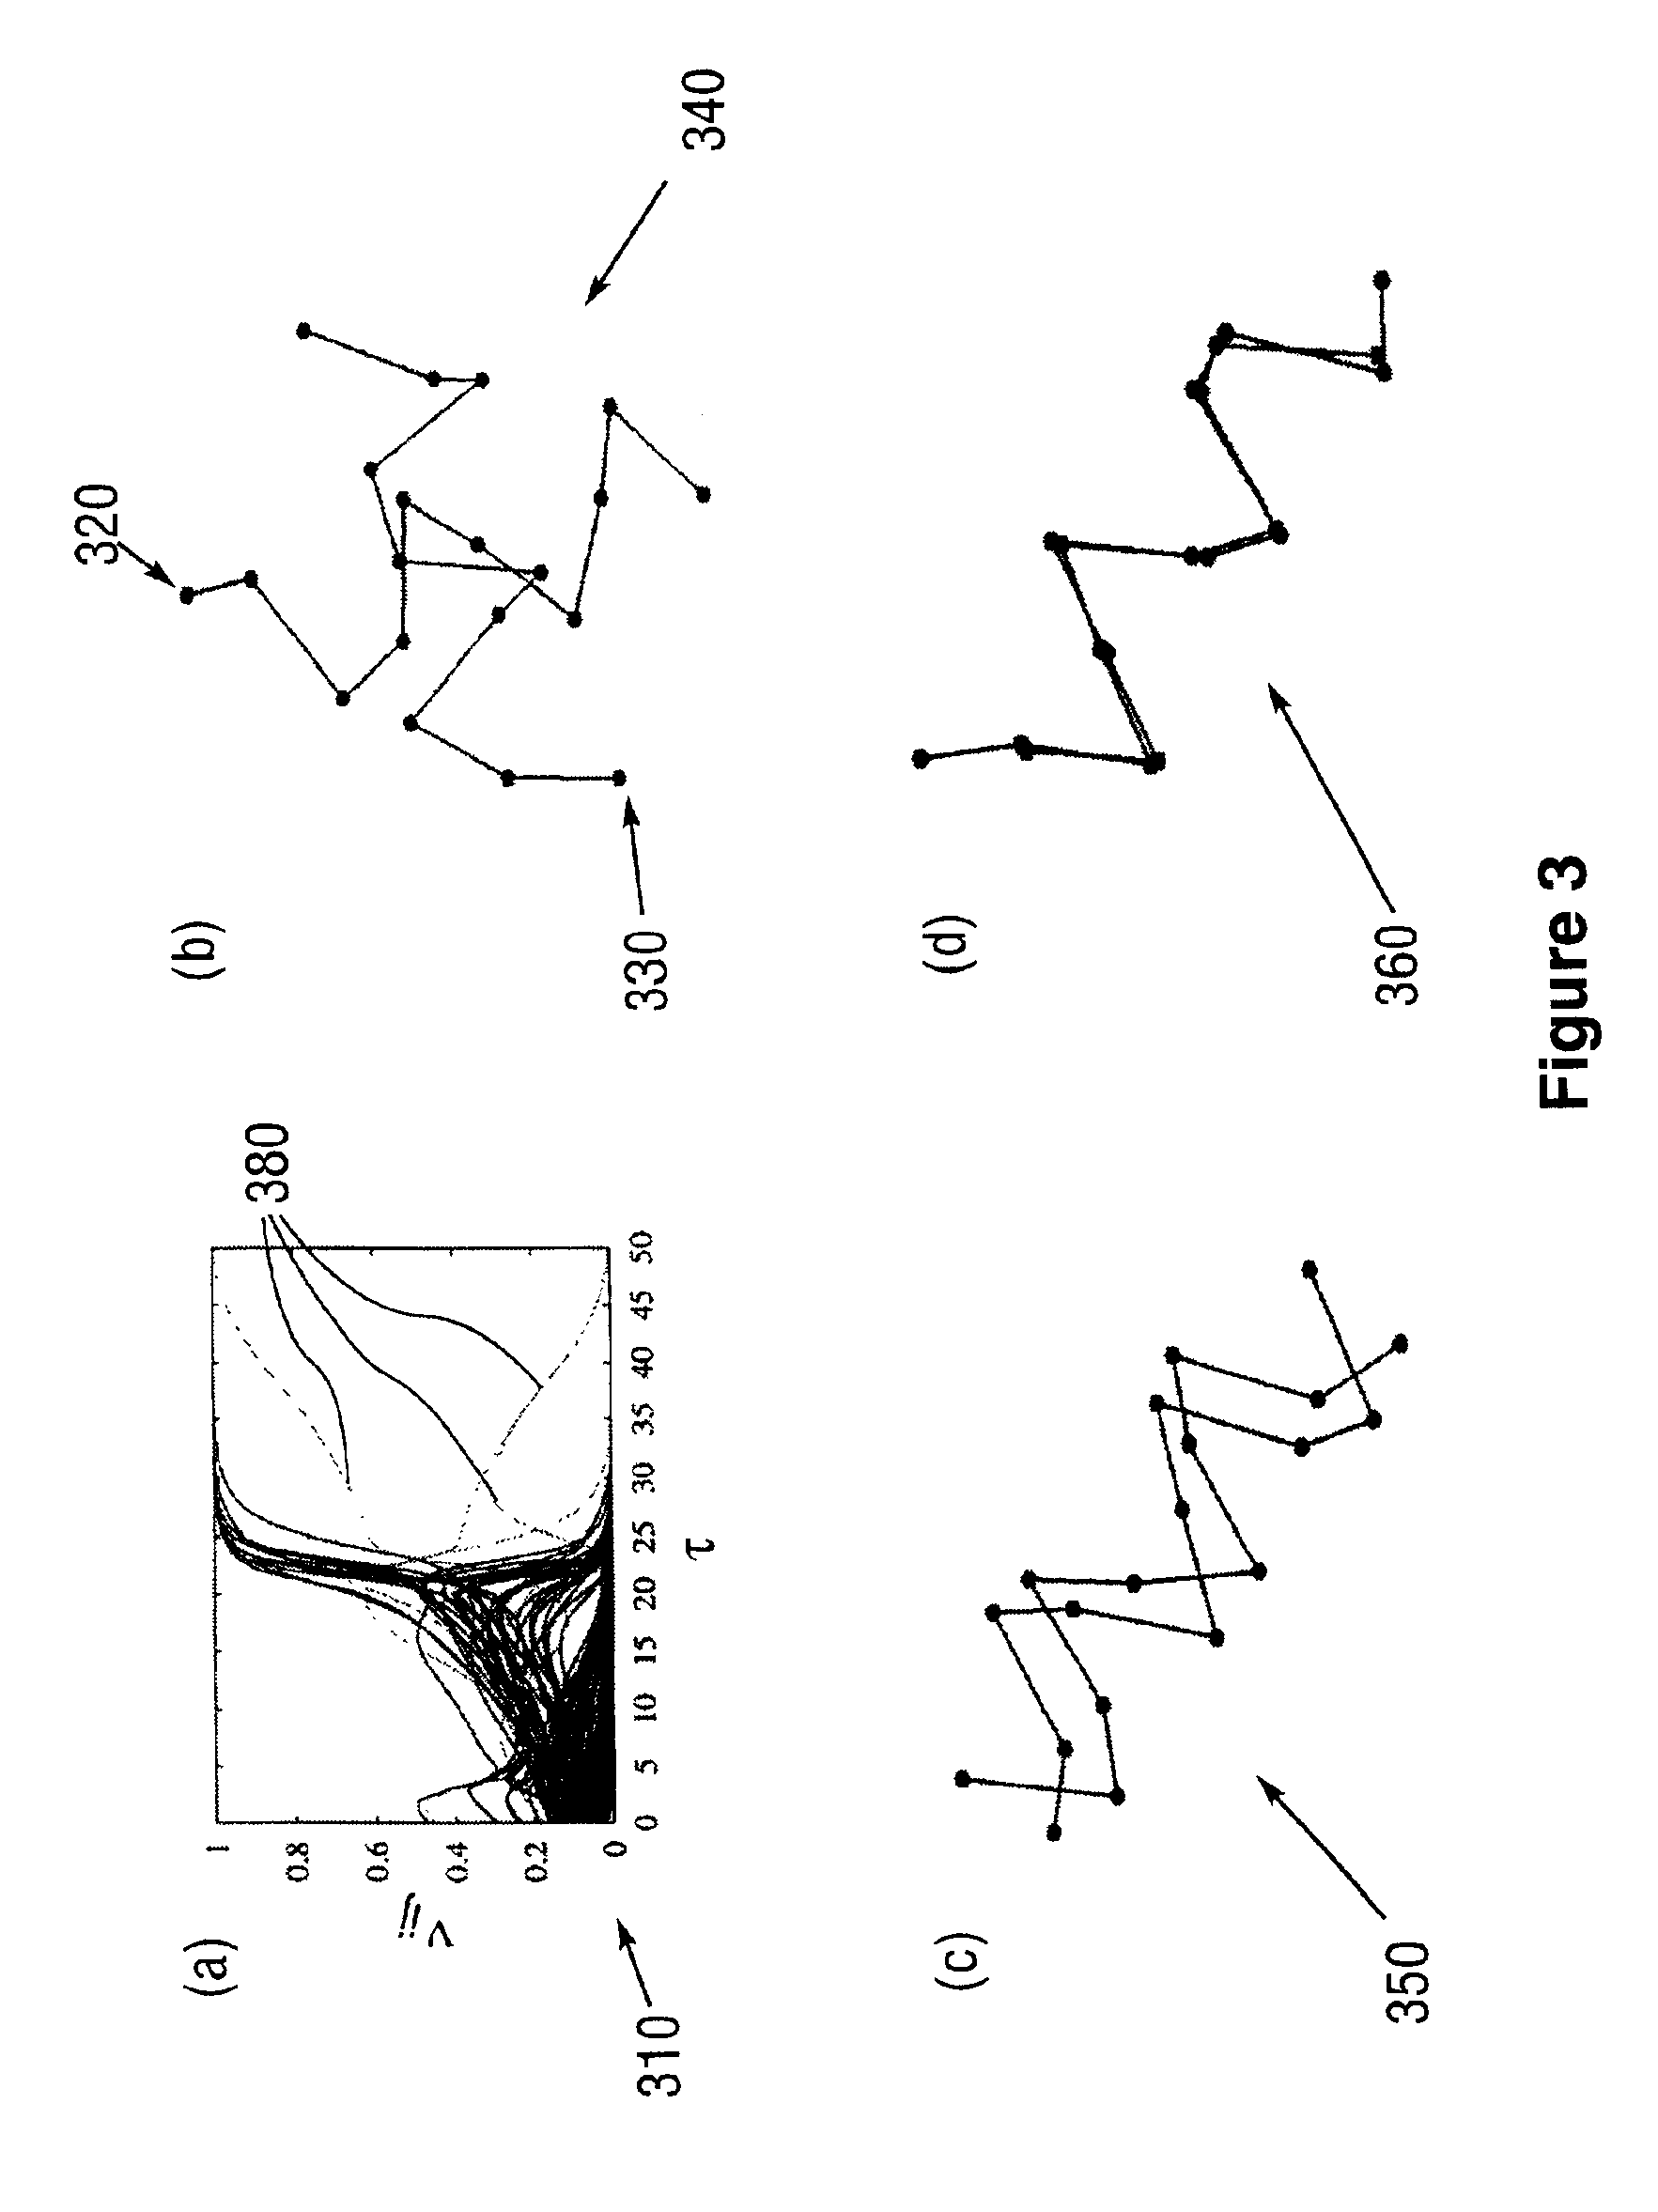 Method for protein structure alignment